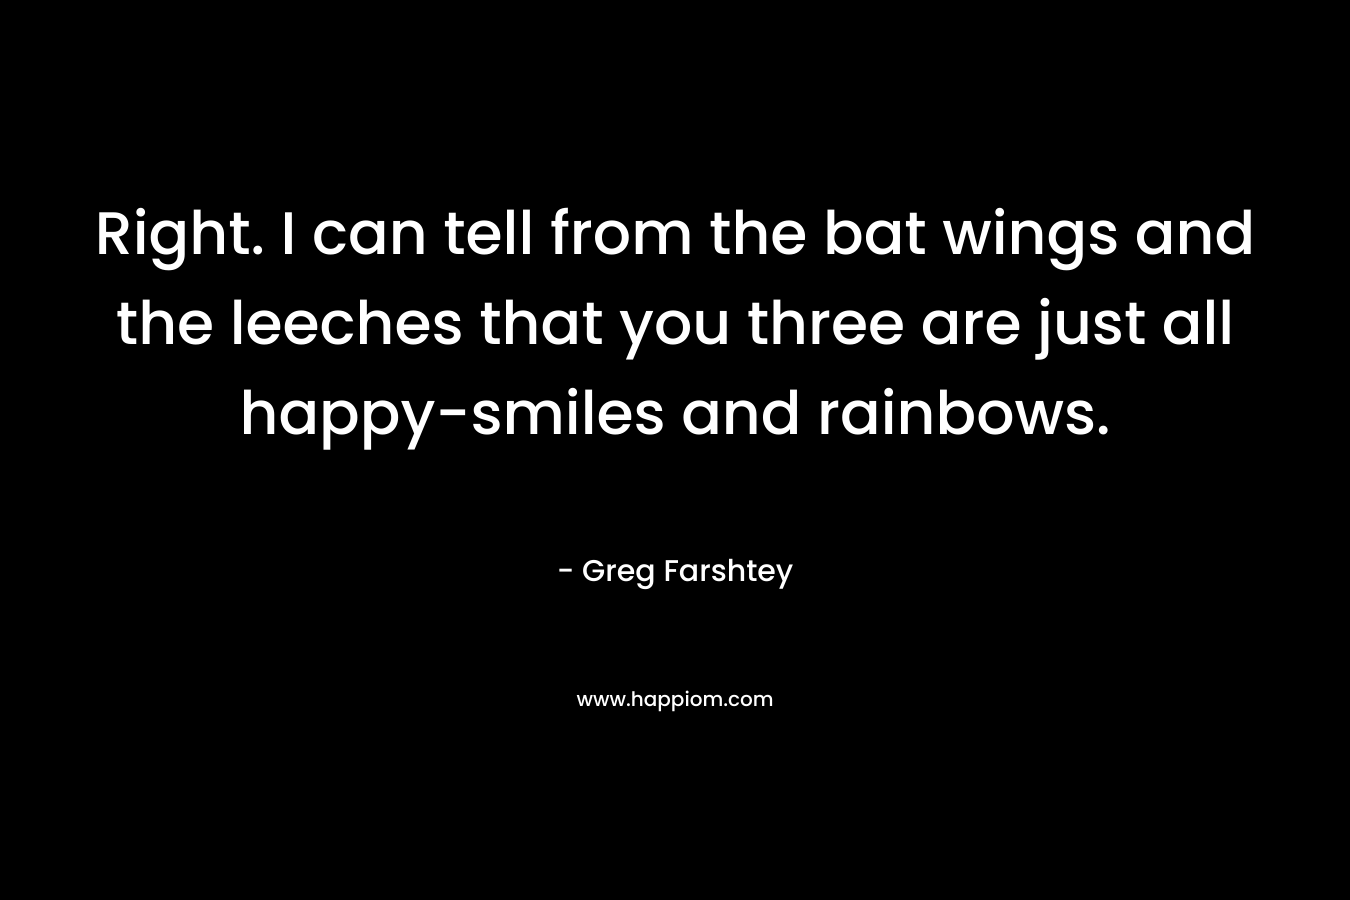 Right. I can tell from the bat wings and the leeches that you three are just all happy-smiles and rainbows. – Greg Farshtey